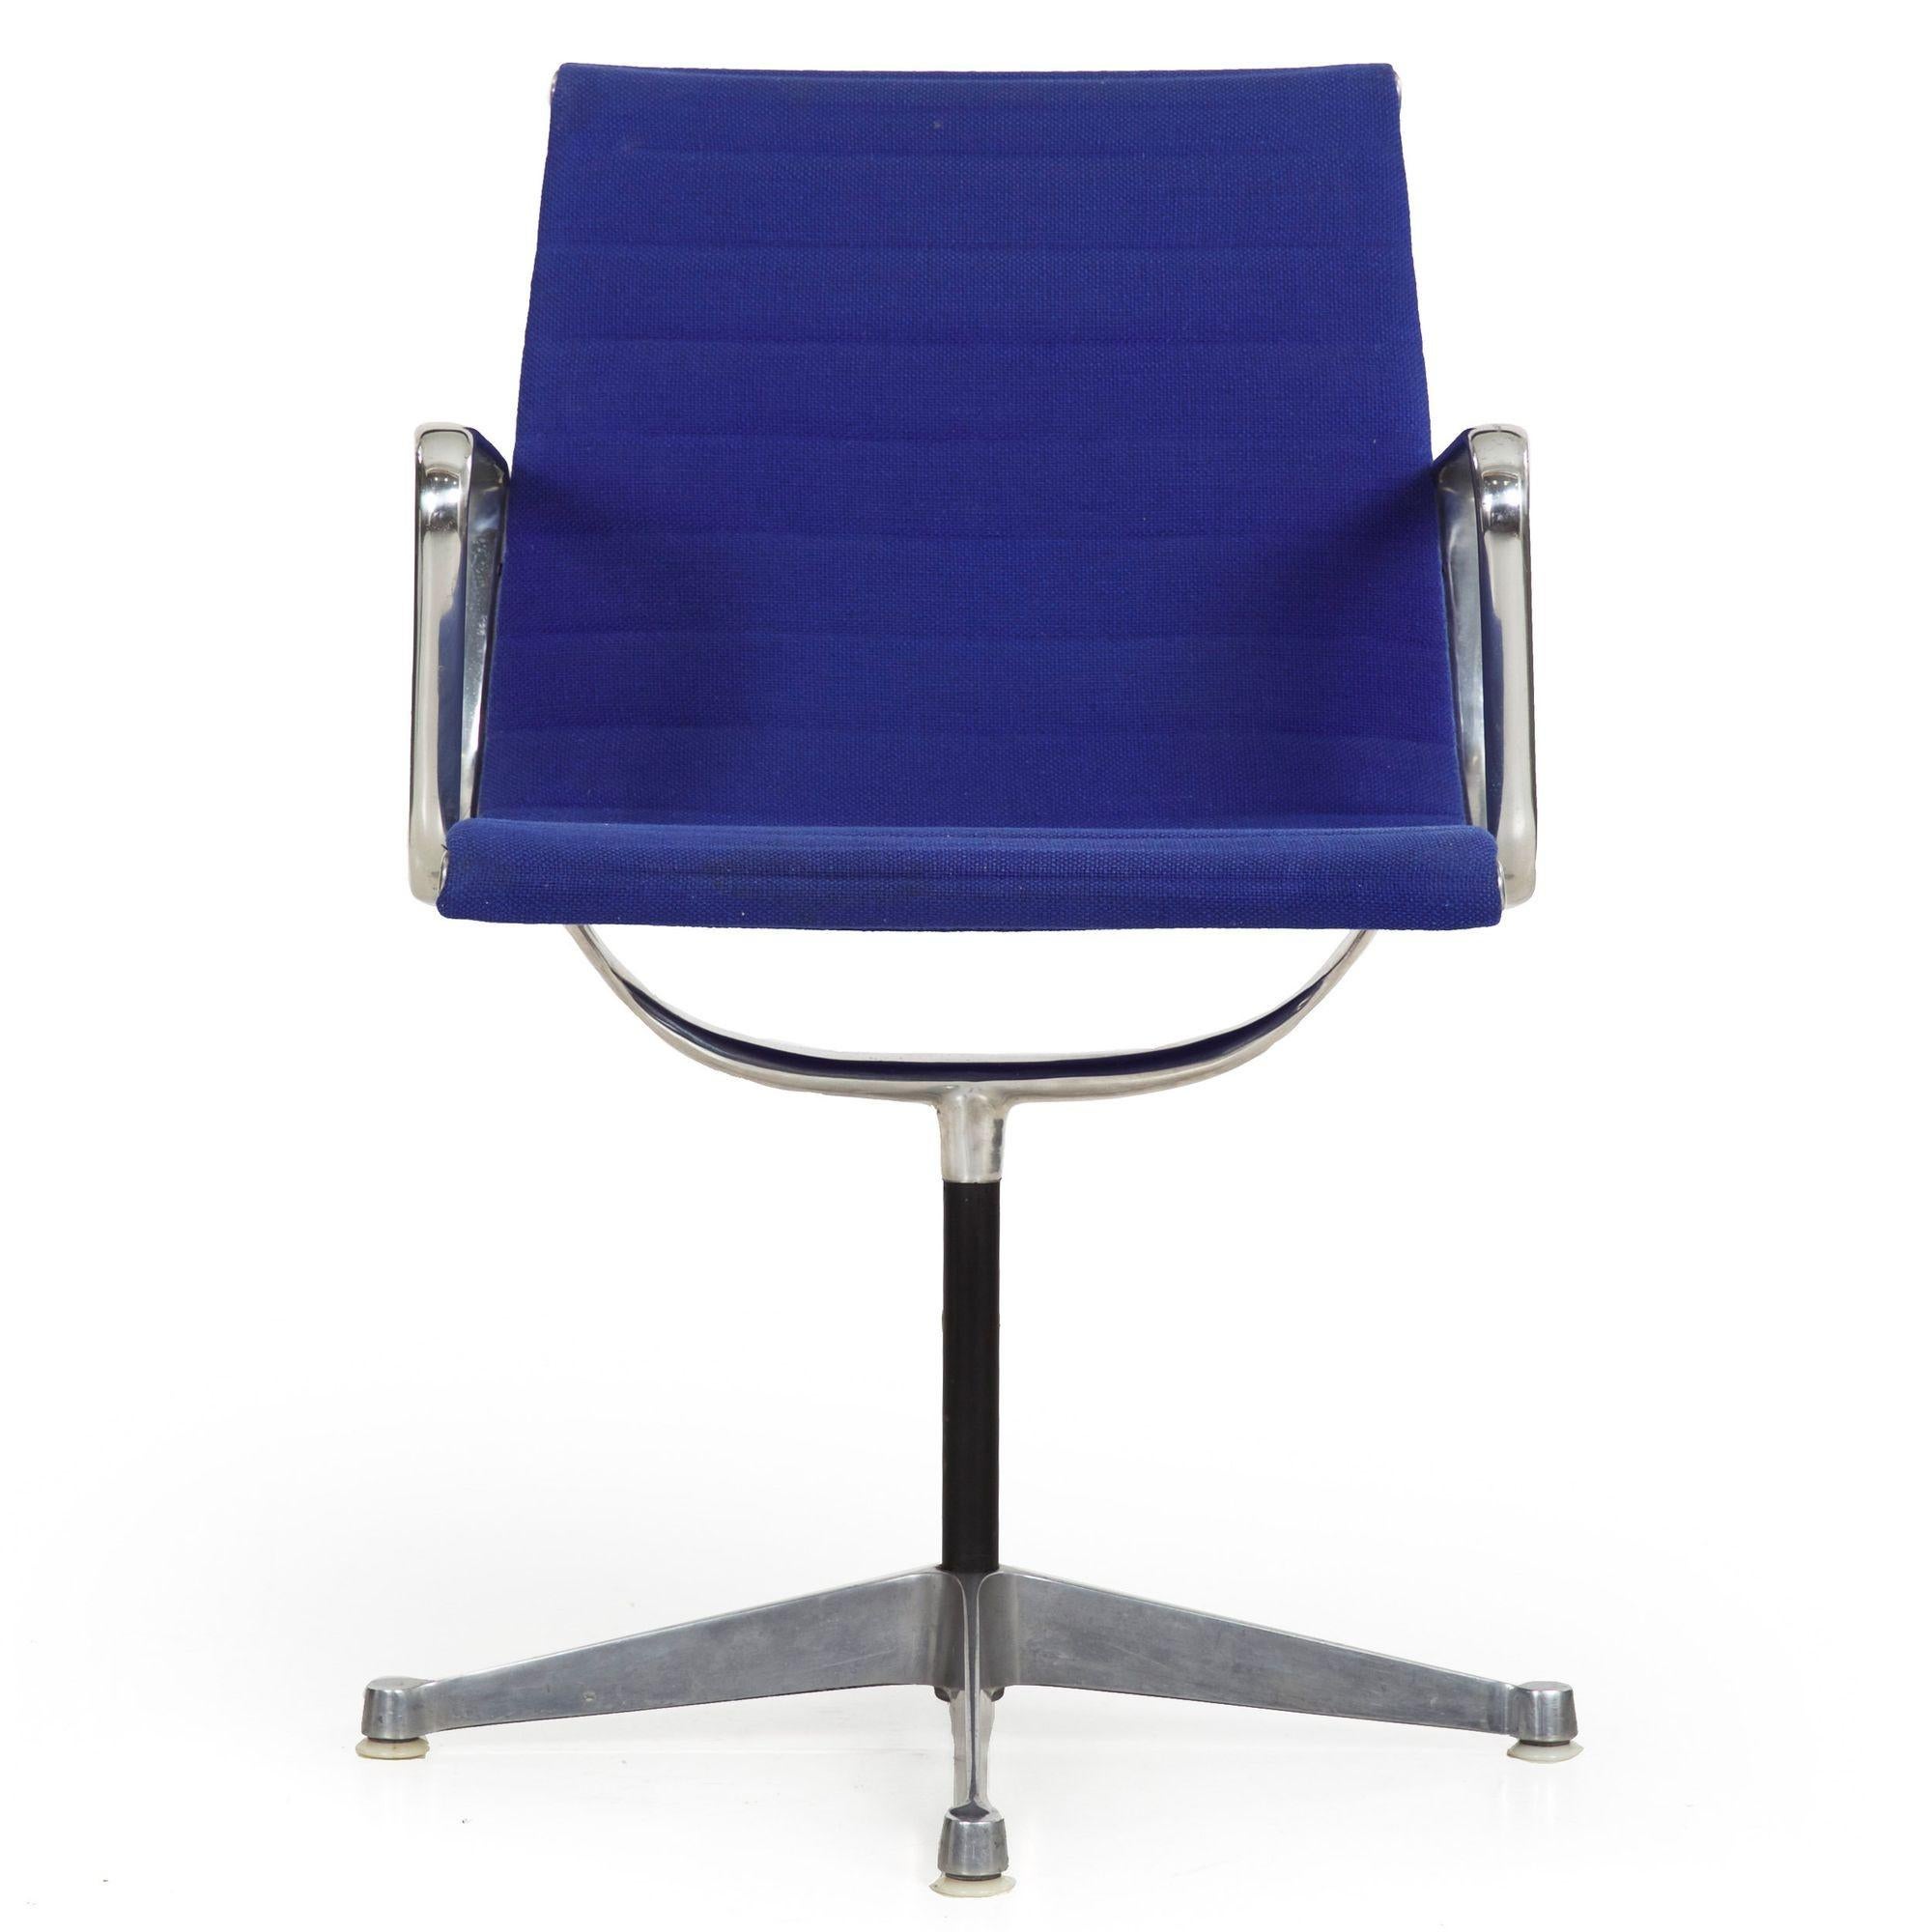 Vintage Blue Swivel Desk Chair by Charles & Ray Eames for Herman Miller
Item # 705VFW20-1

This early swivel desk chair designed by Charles Eames and retailed by Herman Miller was designed with the early flattened footing and retains the original